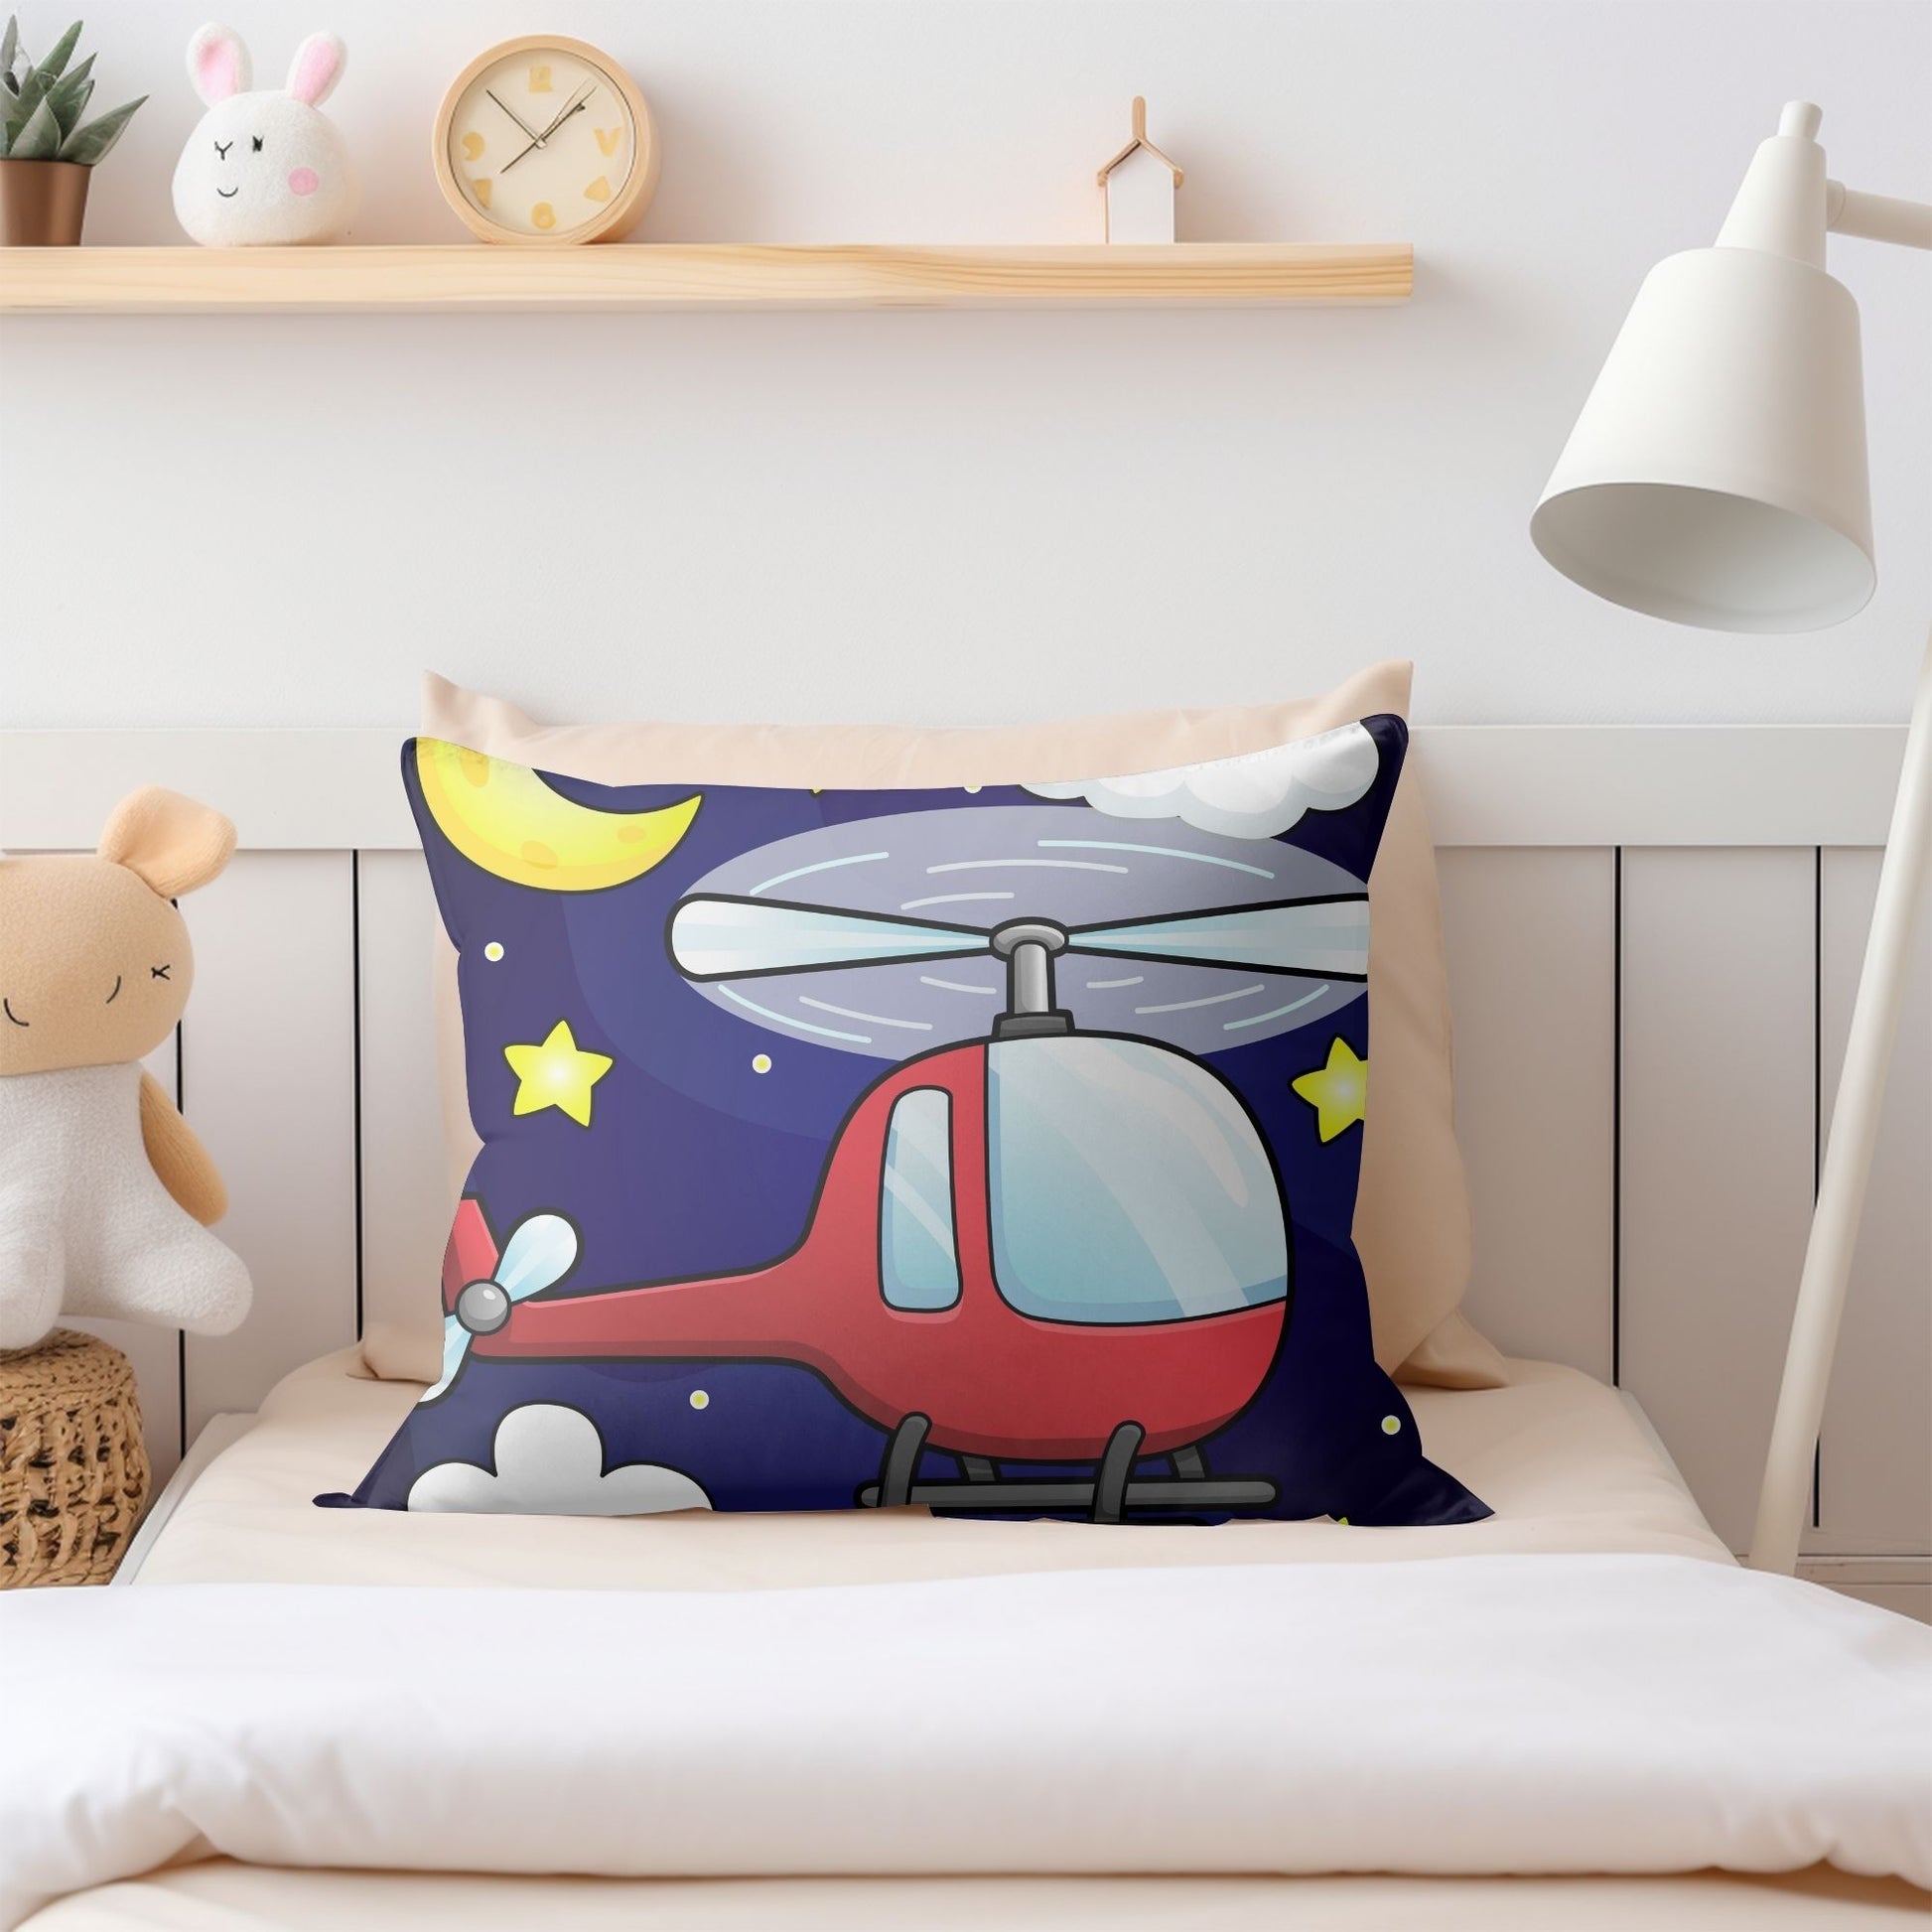 Fun-filled pillow featuring a vibrant red helicopter for kids' spaces.